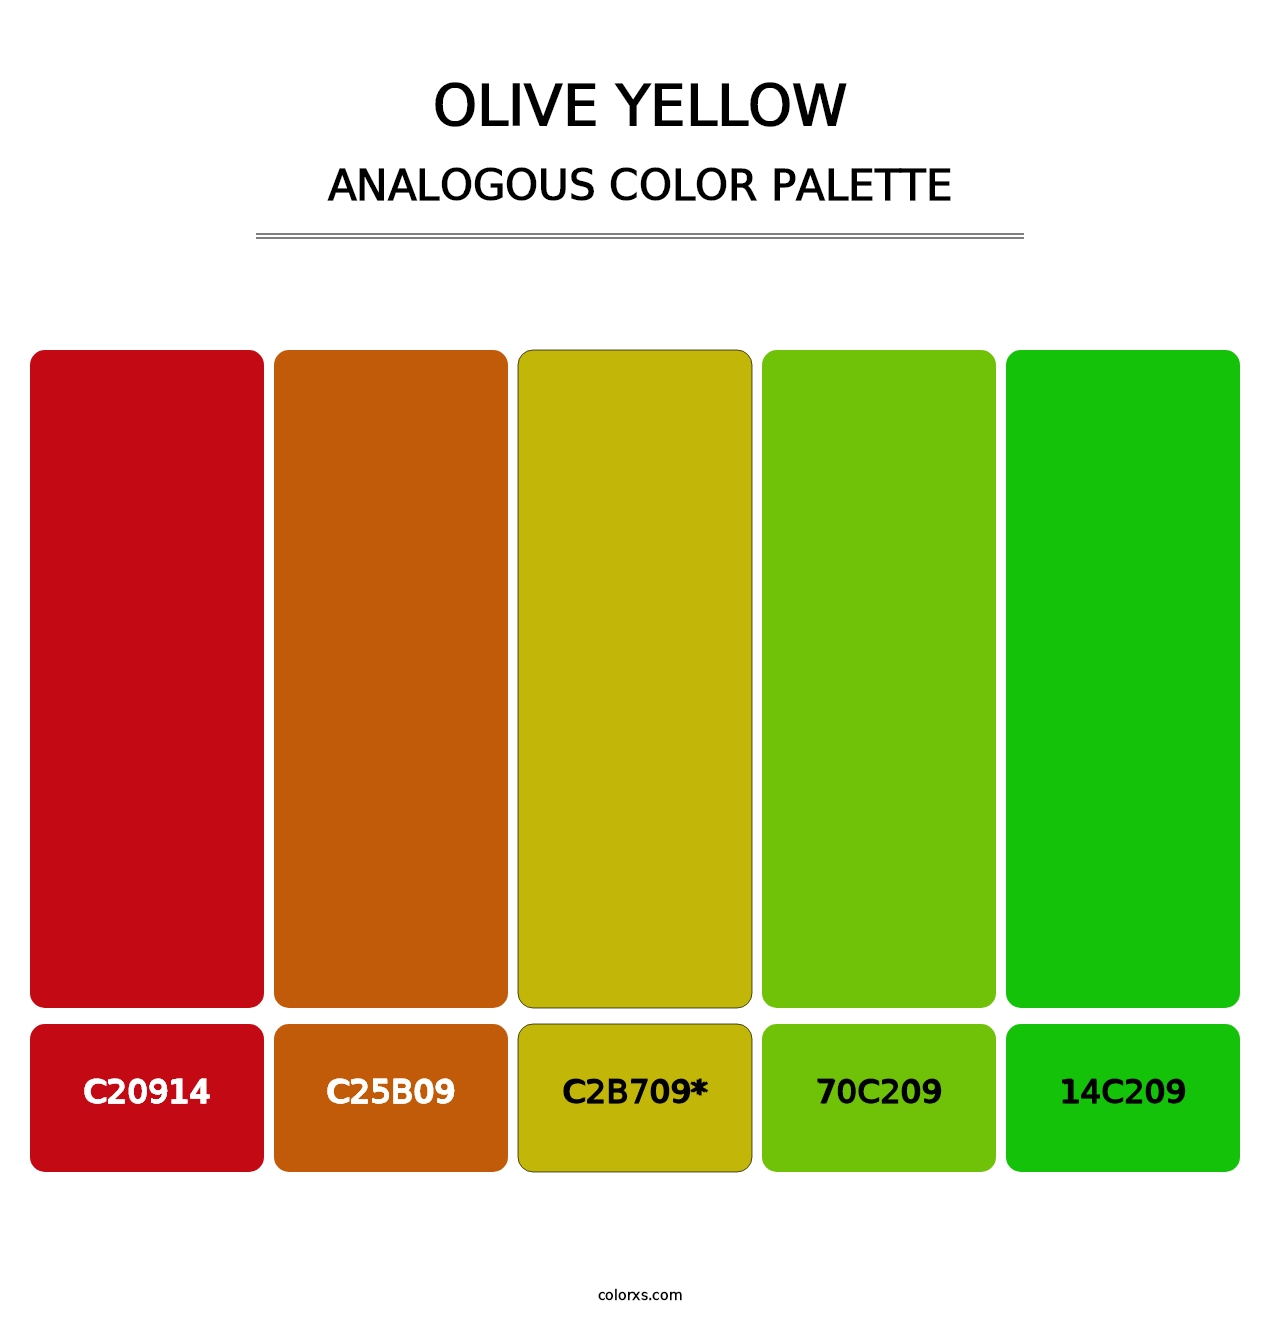 Olive Yellow - Analogous Color Palette